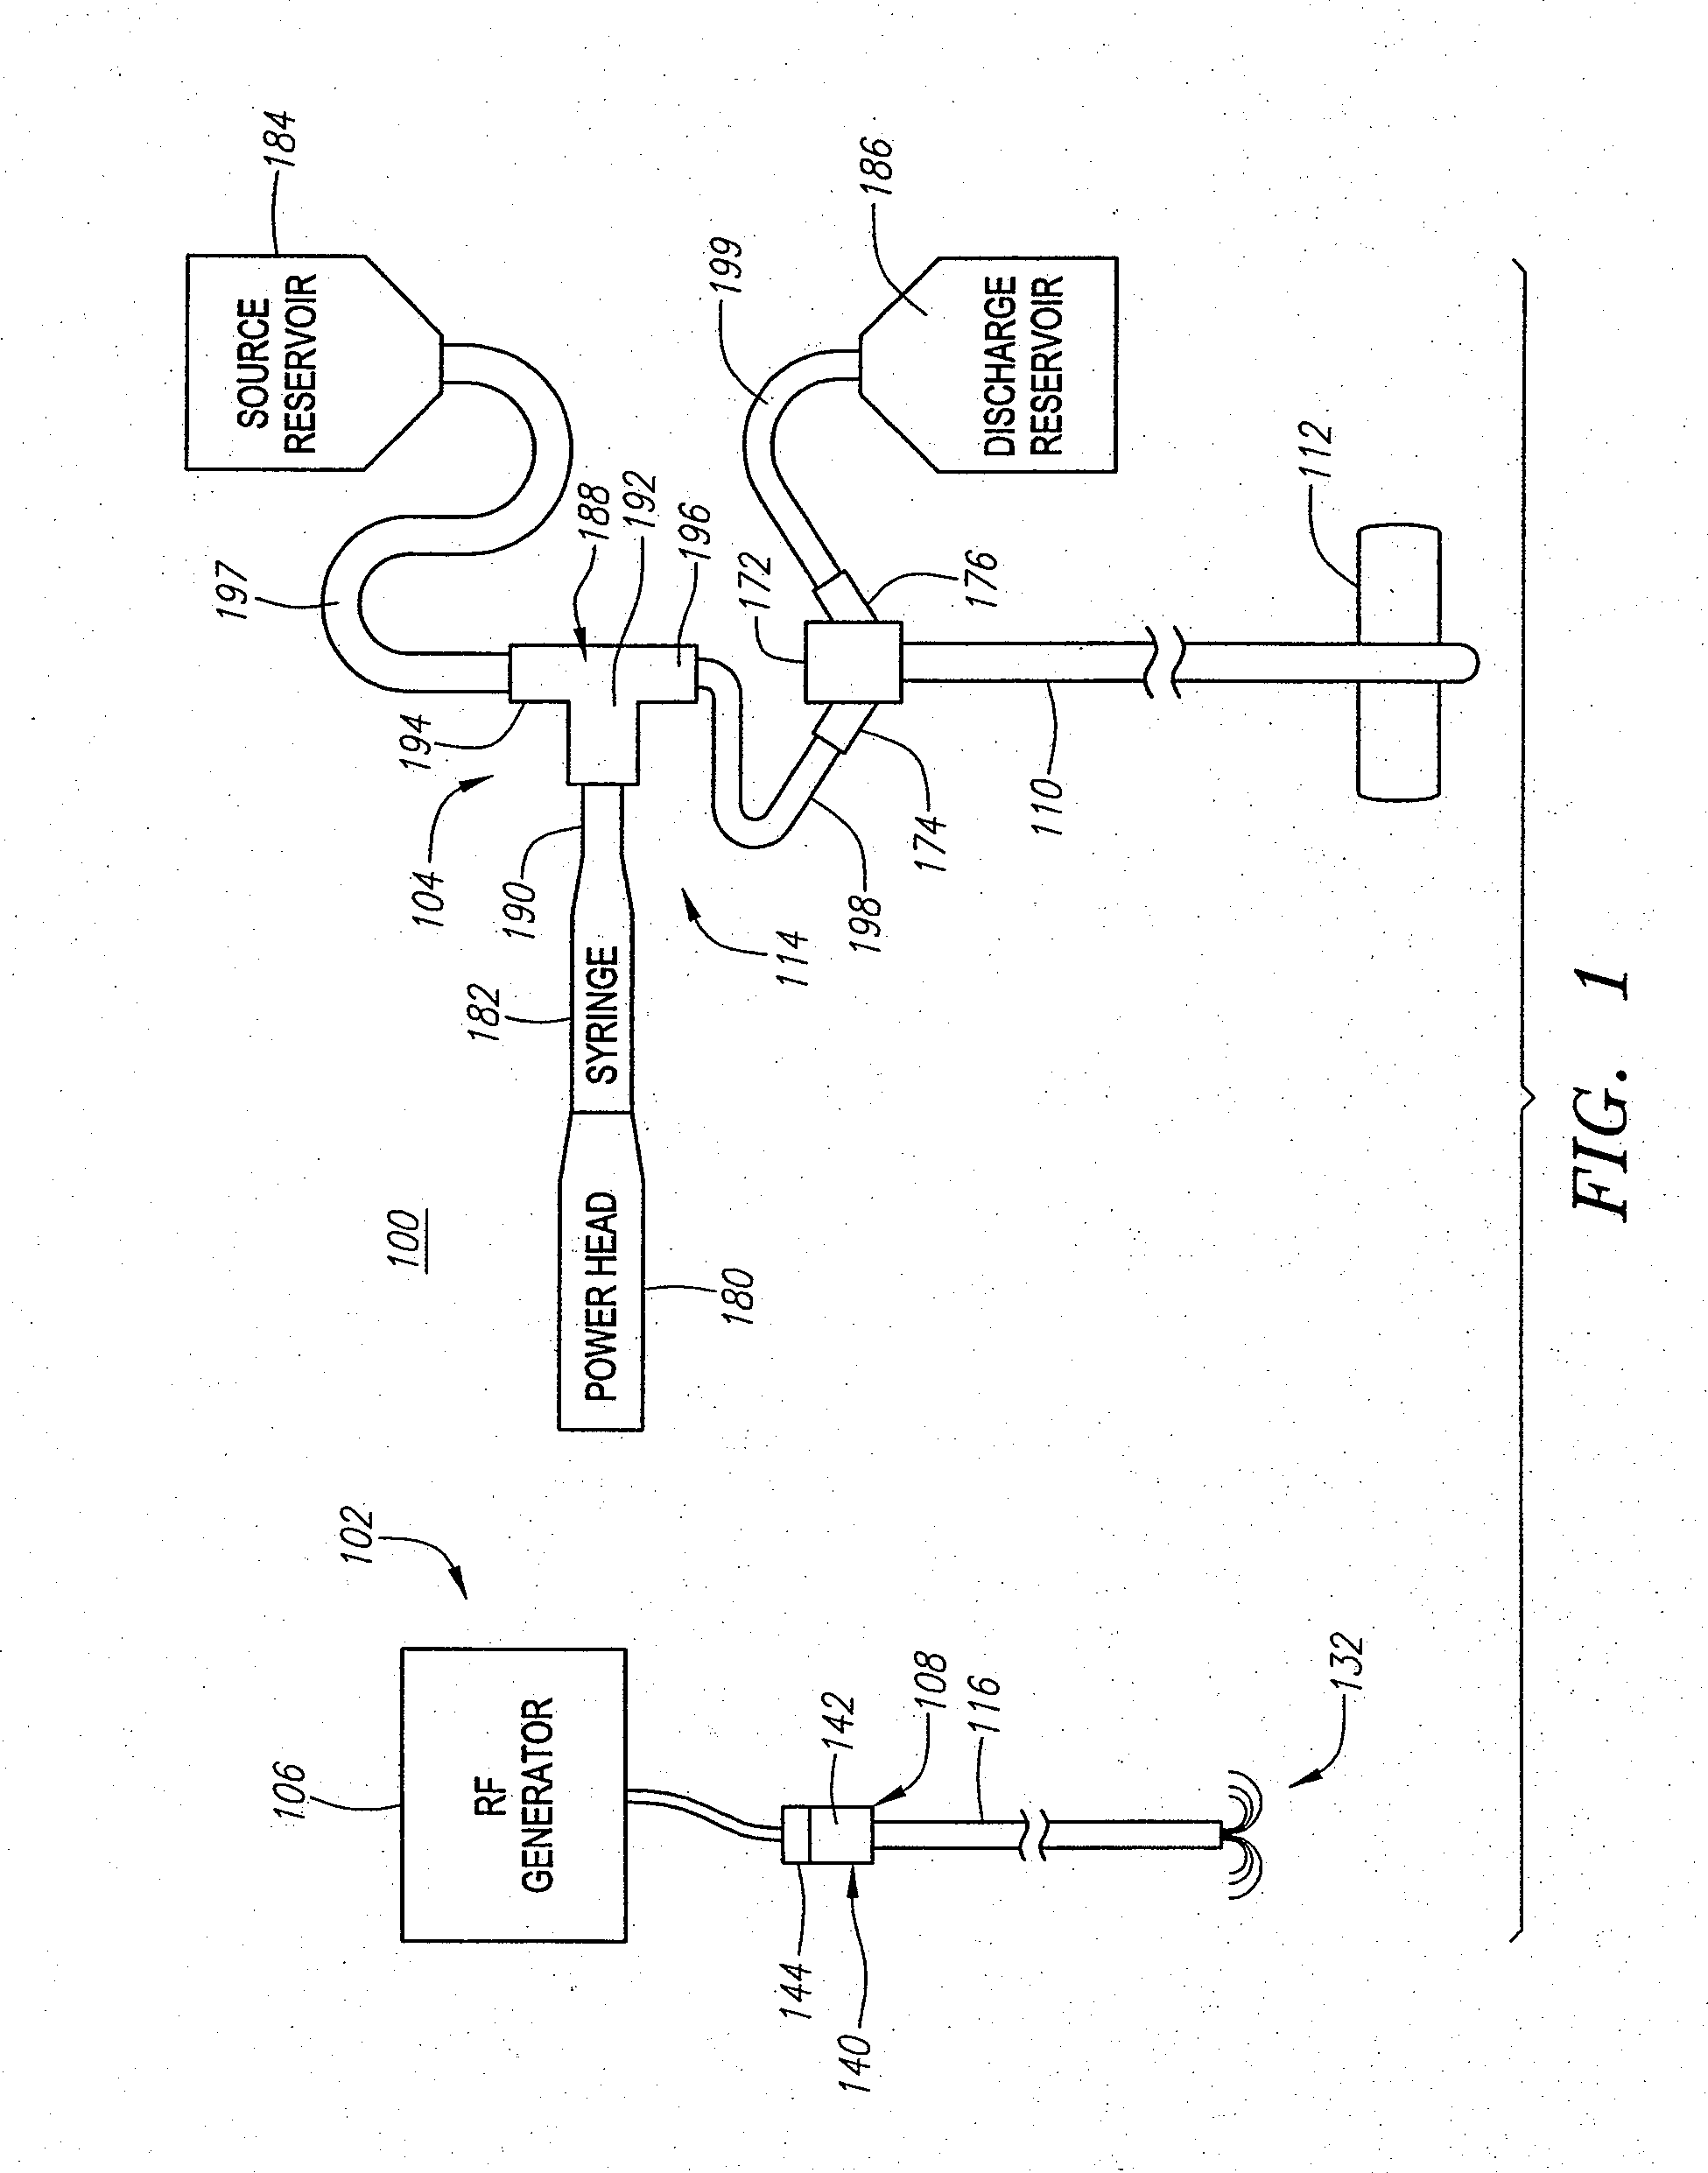 Radio frequency ablation cooling shield